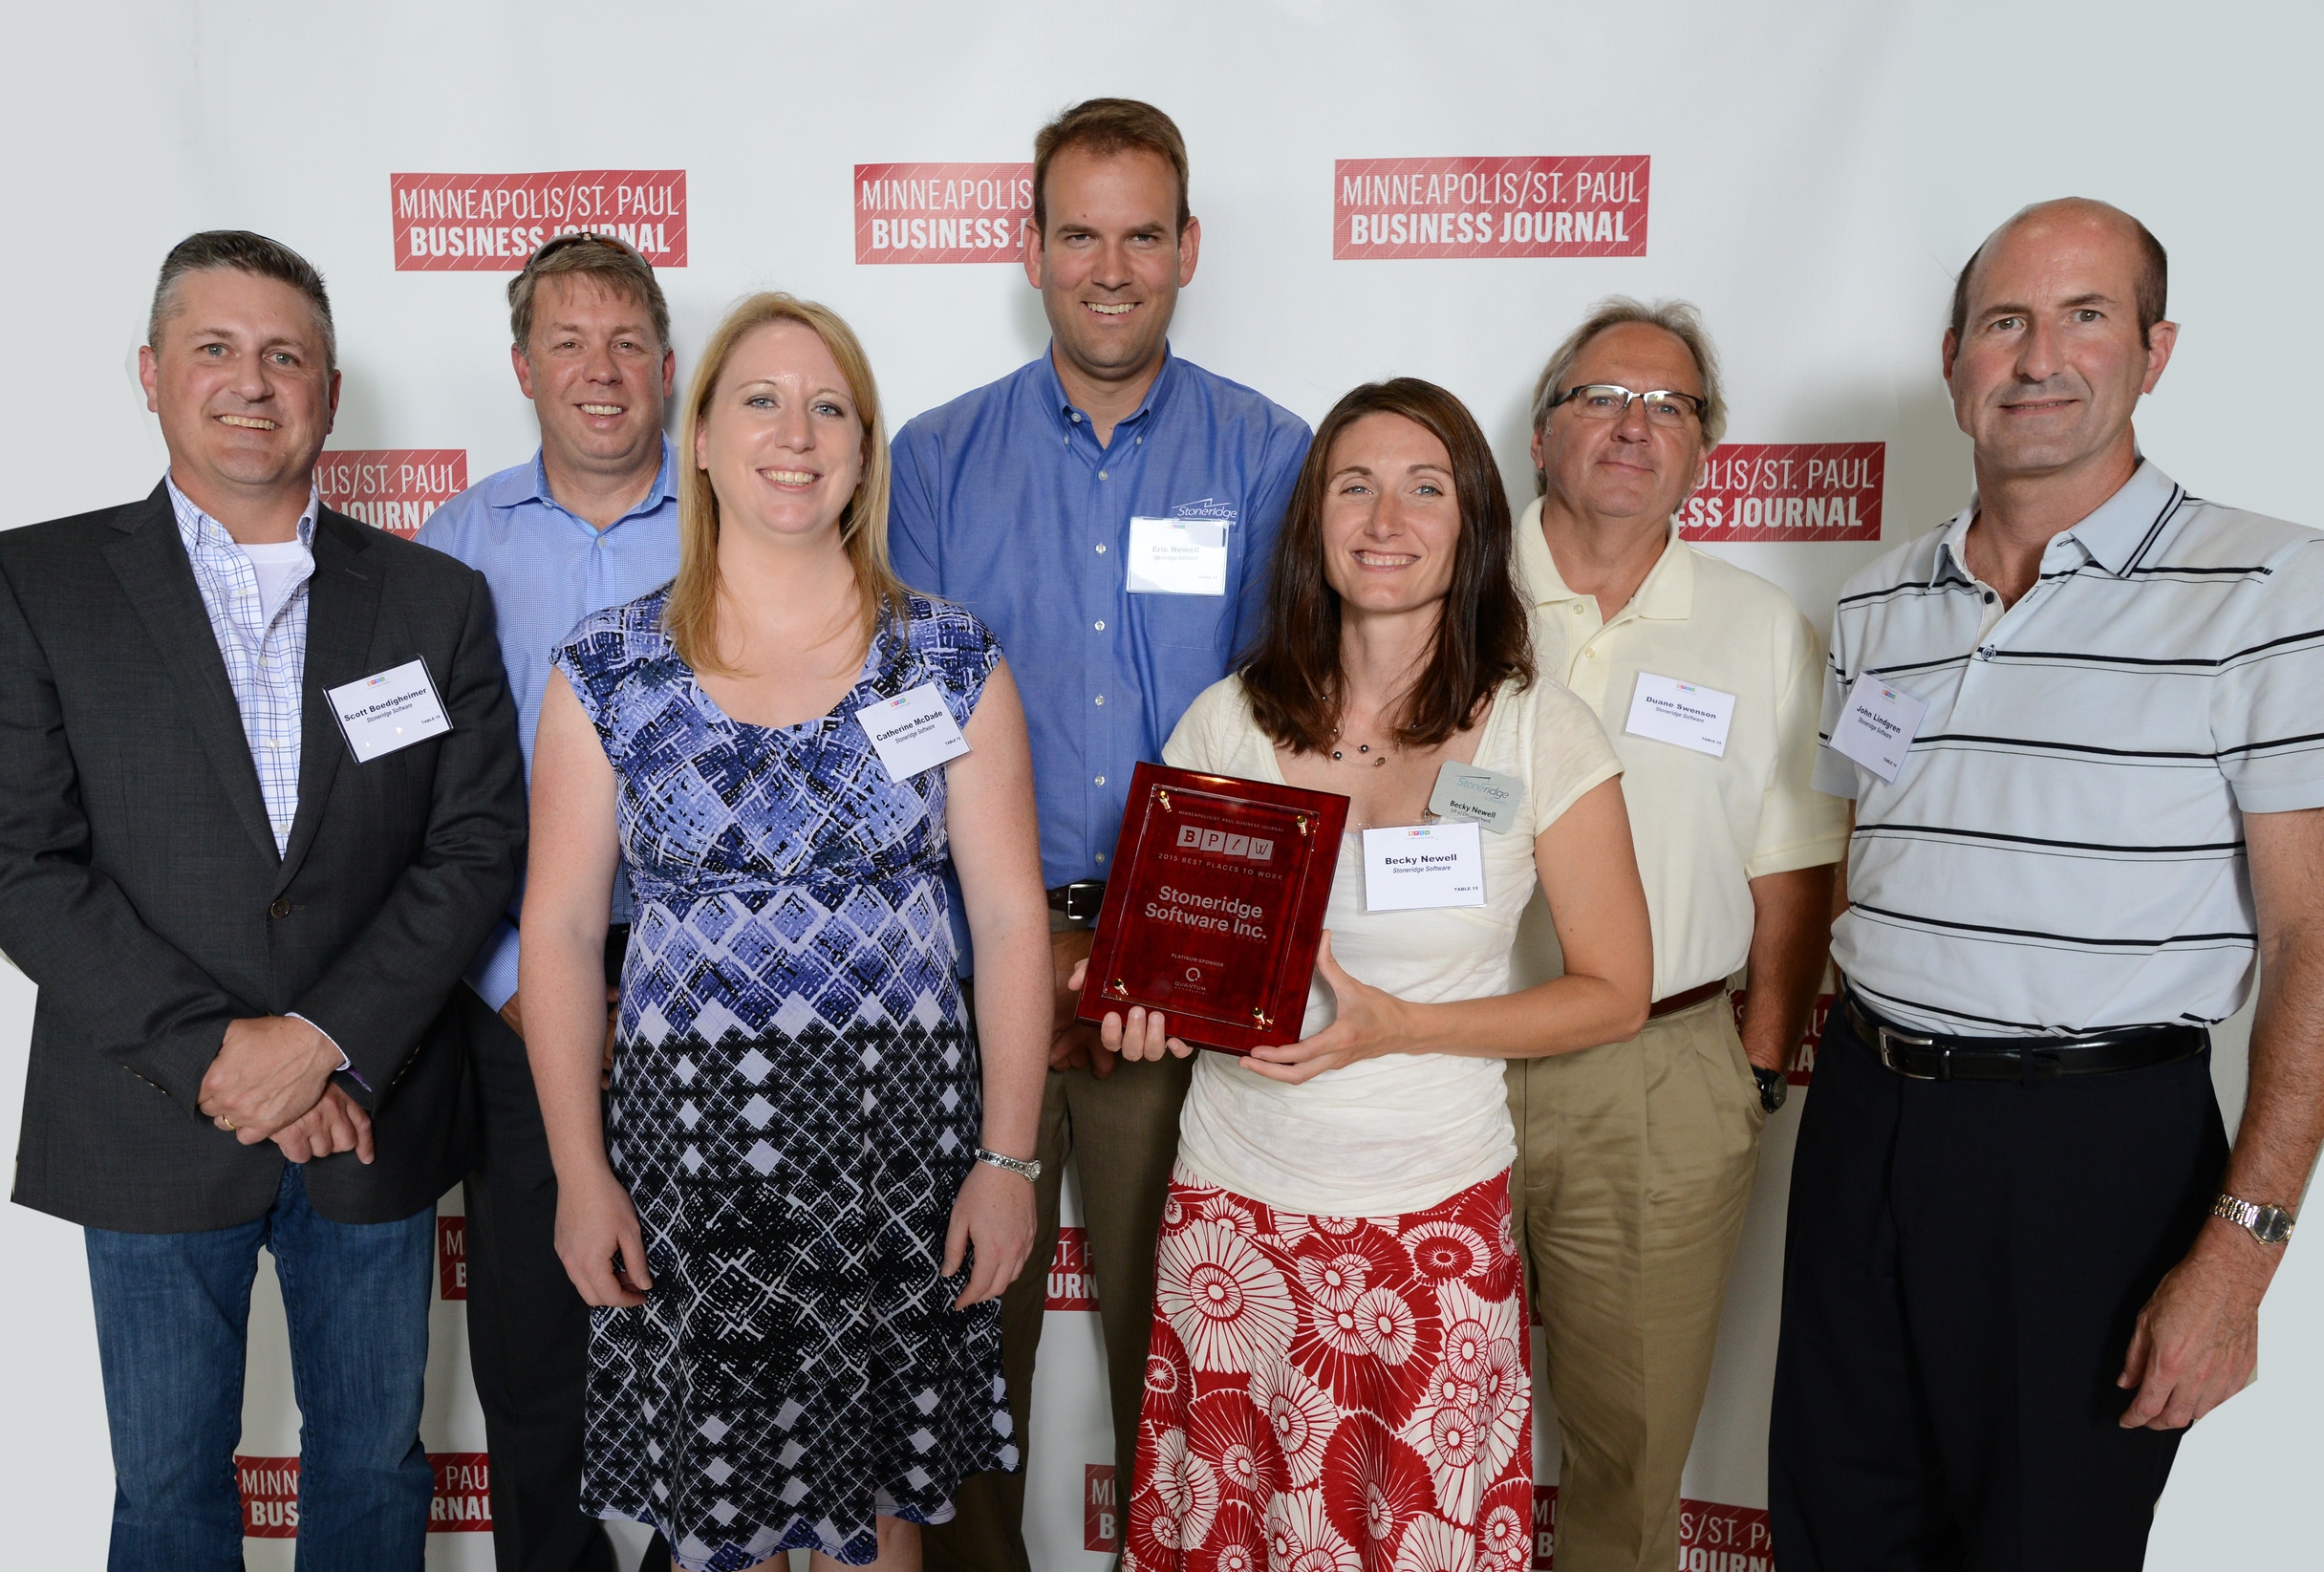 Stoneridge software awarded at msp business journal’s best place to work celebration